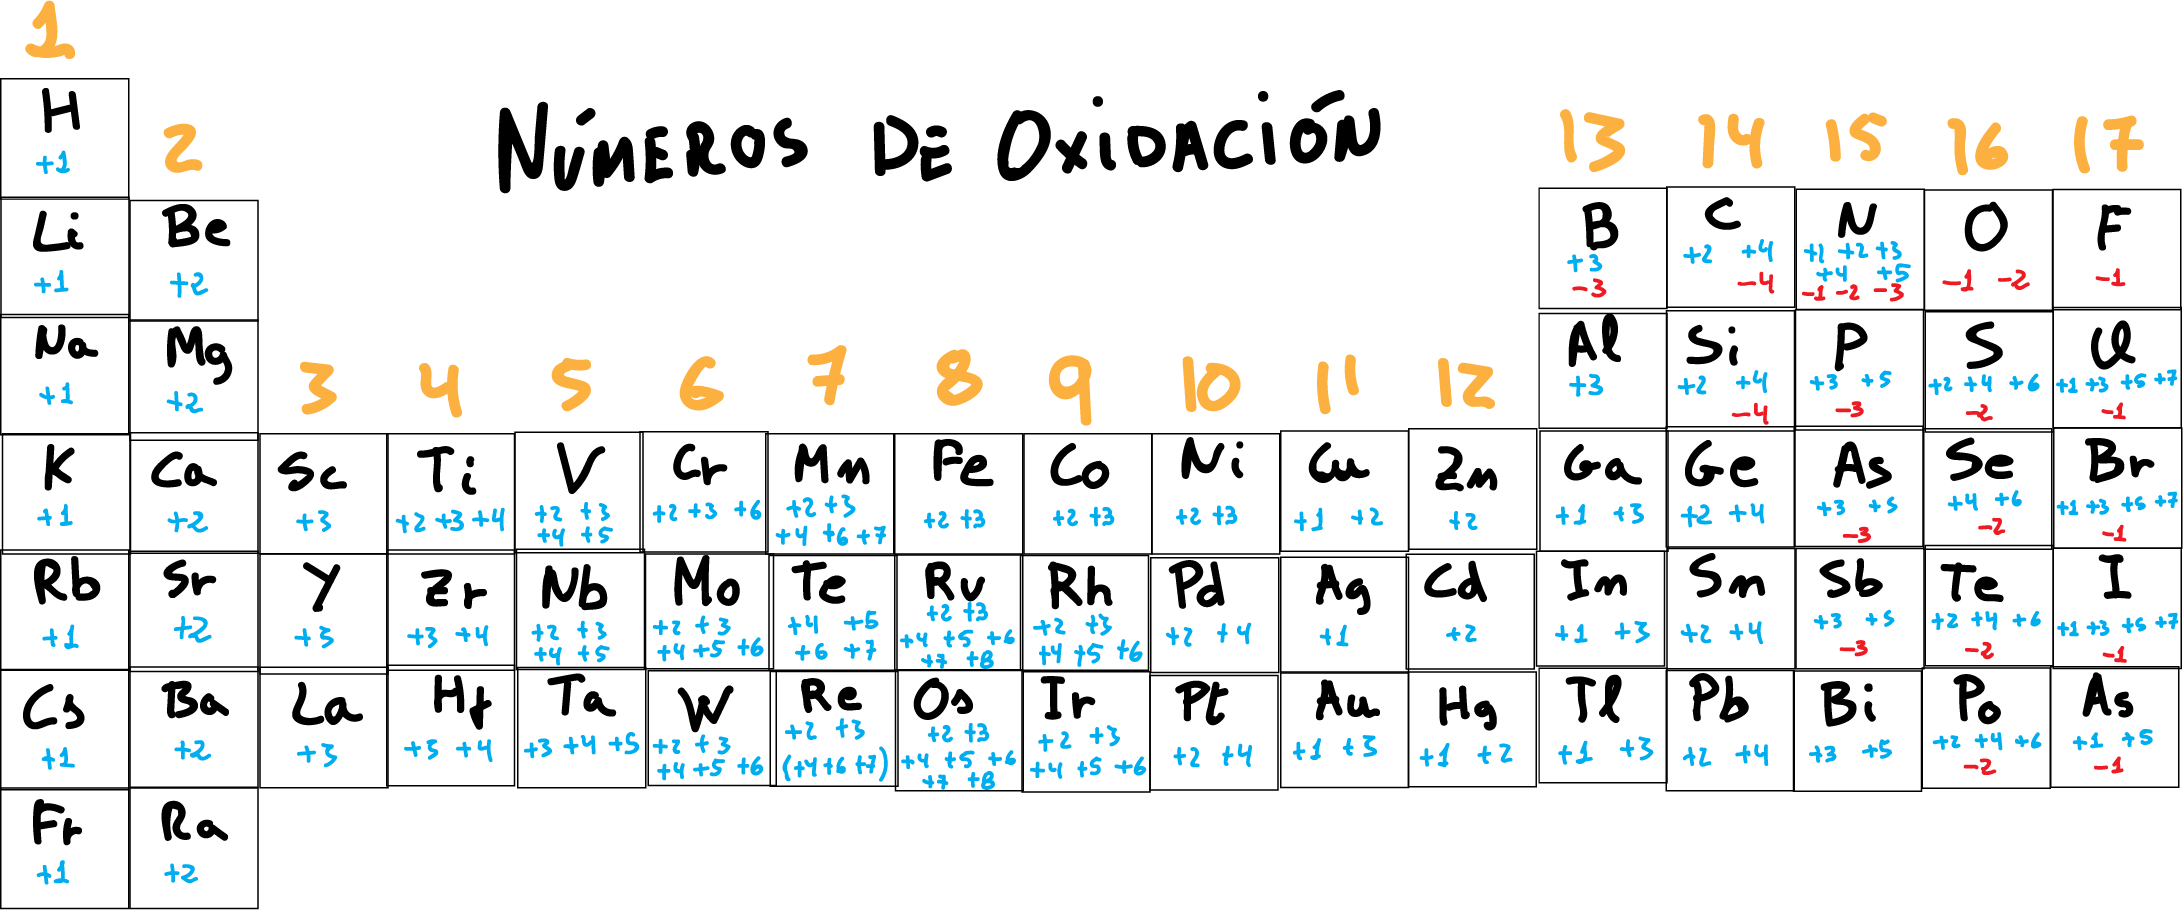 Oxidation number of the elements of the periodic table